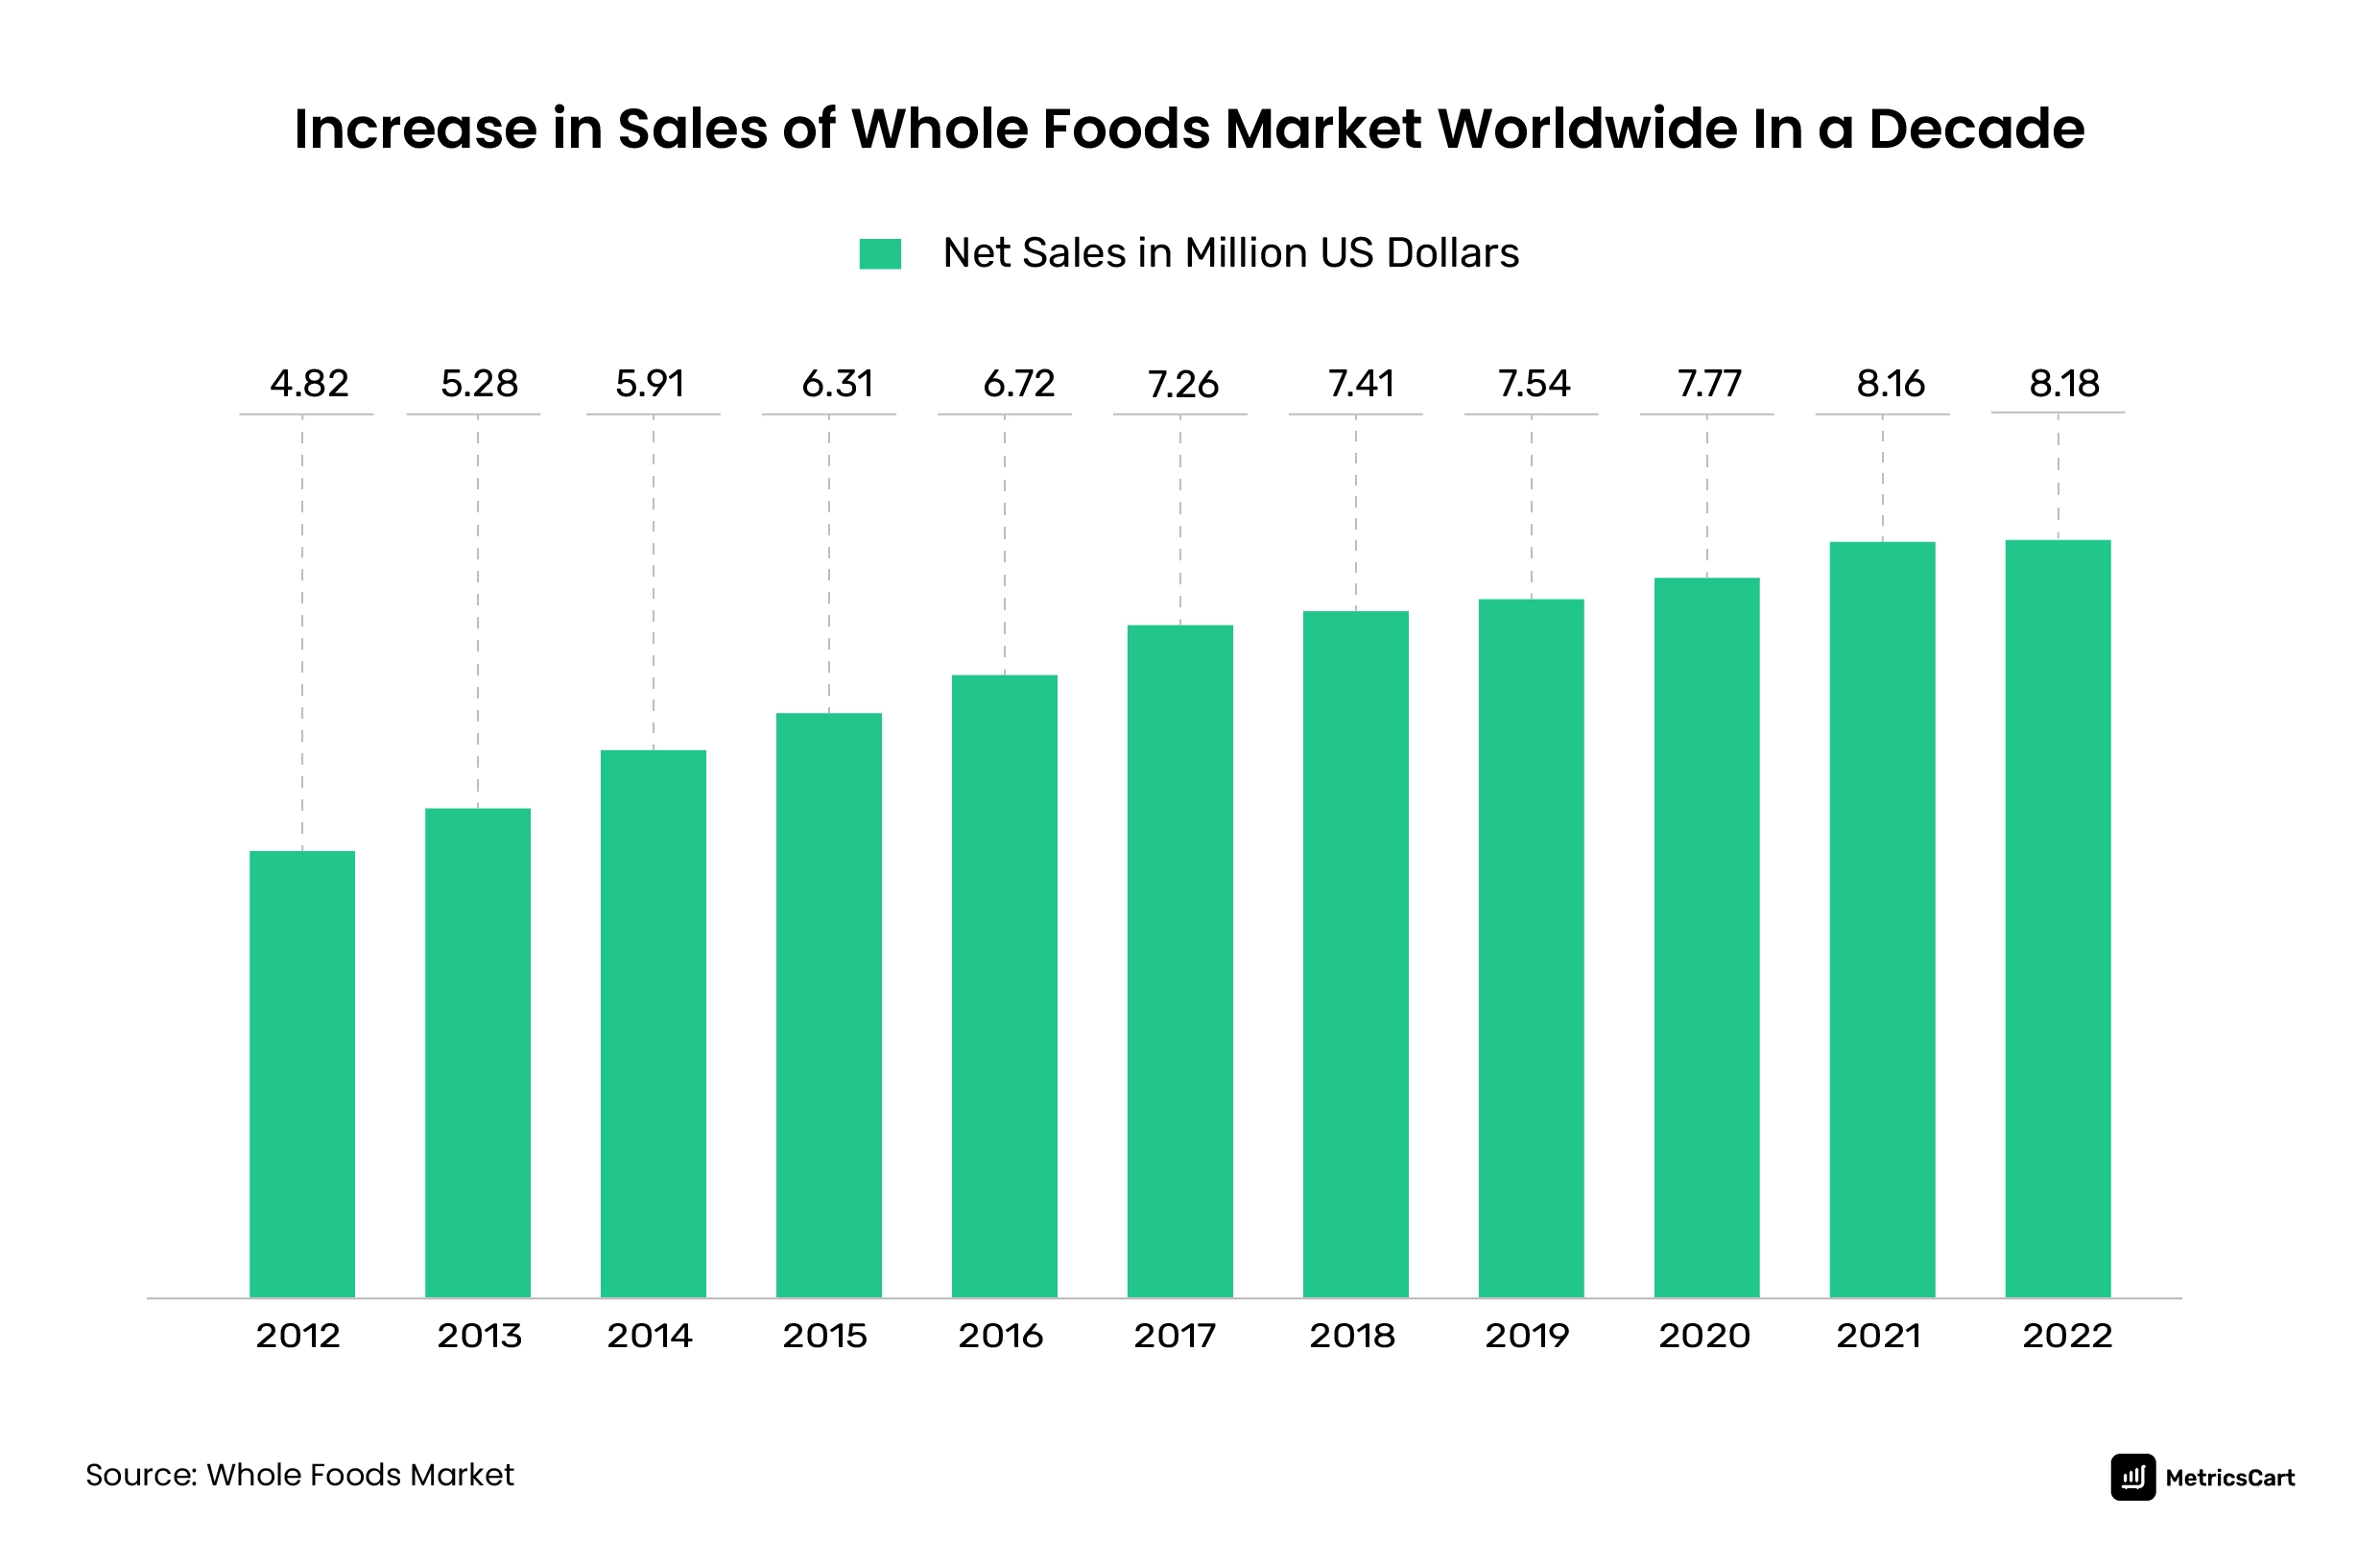 Consistent growth of Whole Foods Sales